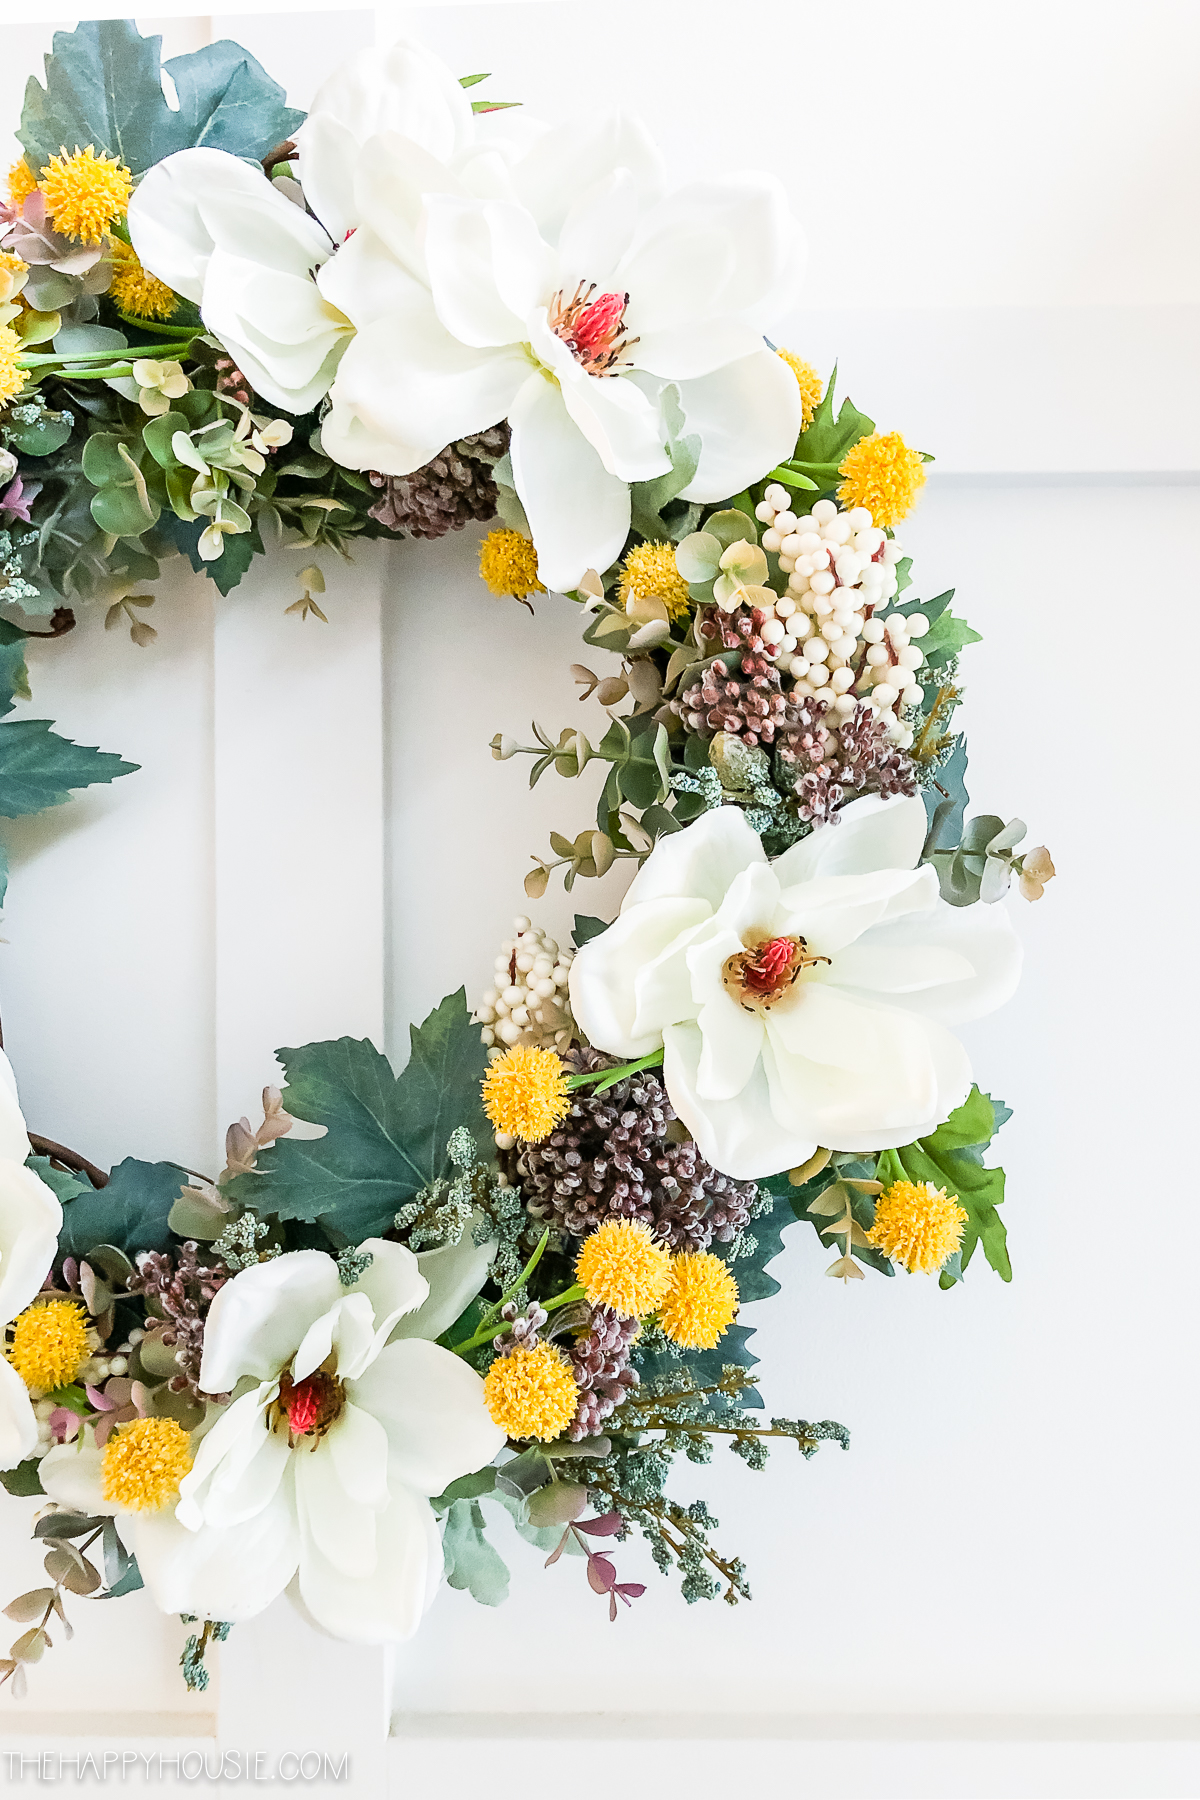 There are white berries on the wreath.